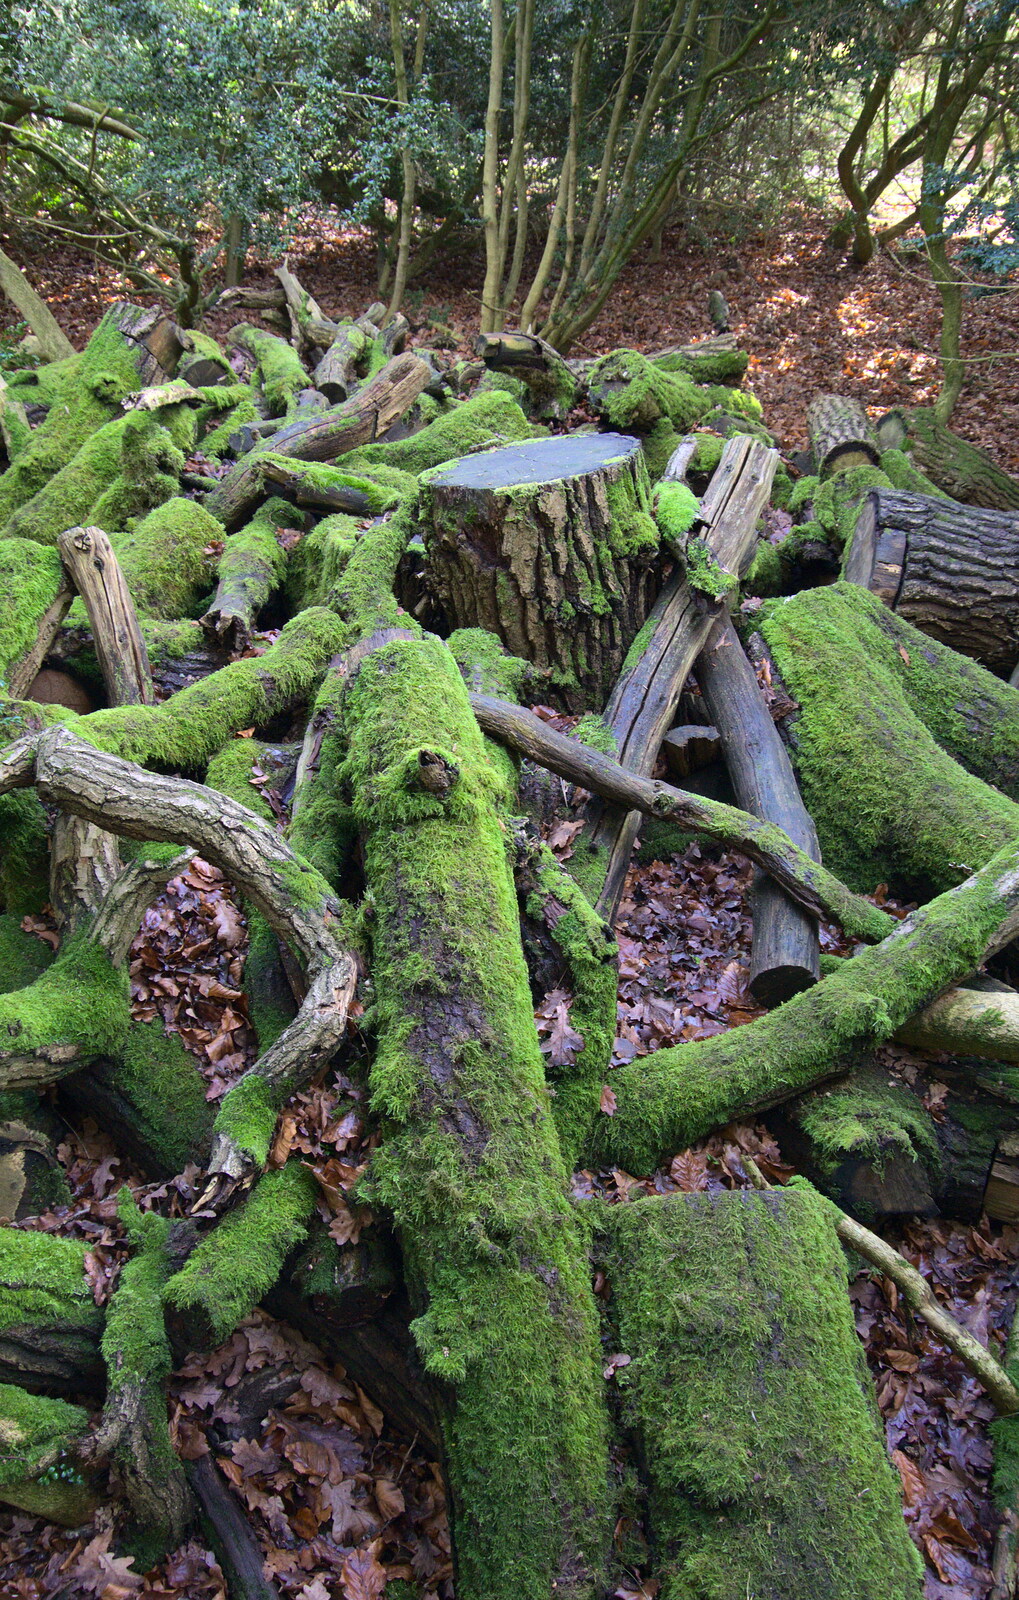 Mossy logs from Life Below Stairs, Ickworth House, Horringer, Suffolk - 28th January 2018